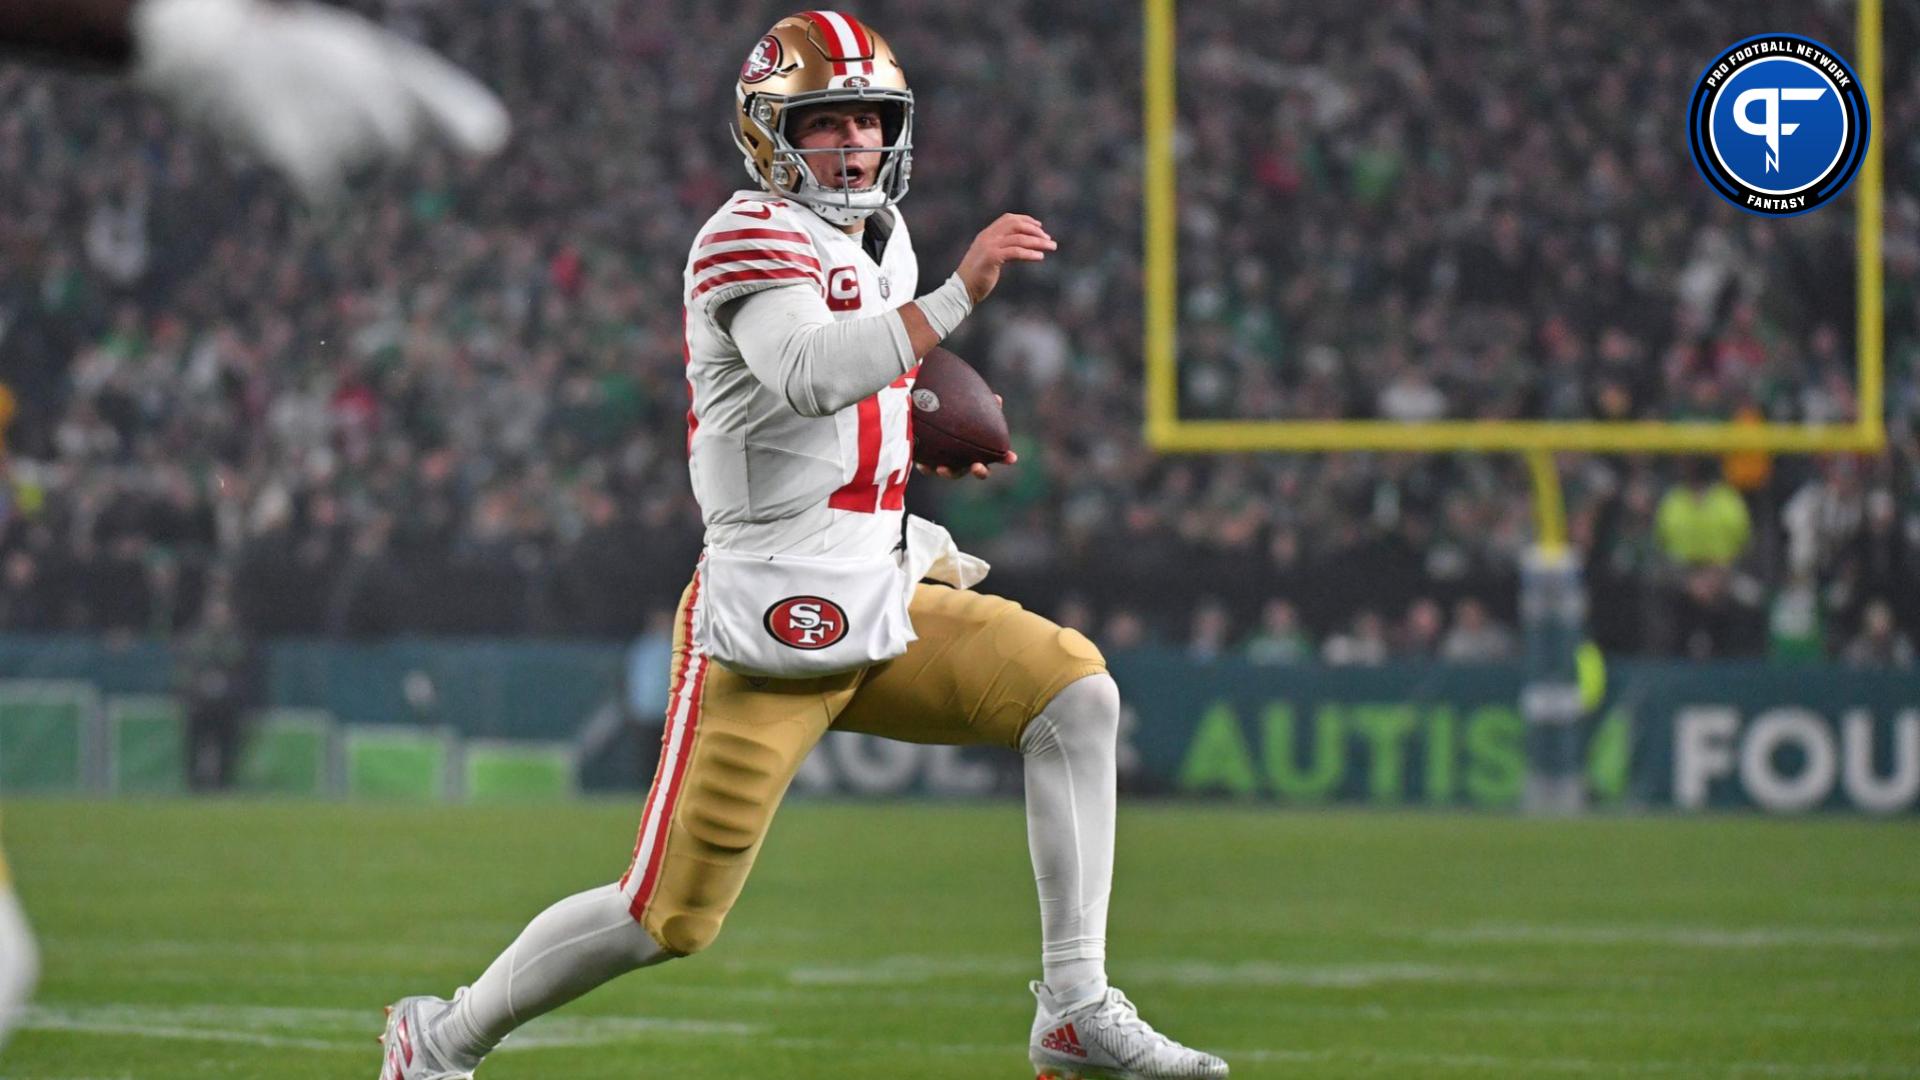 San Francisco 49ers quarterback Brock Purdy (13) carries the football against the Philadelphia Eagles during the second quarter at Lincoln Financial Field.